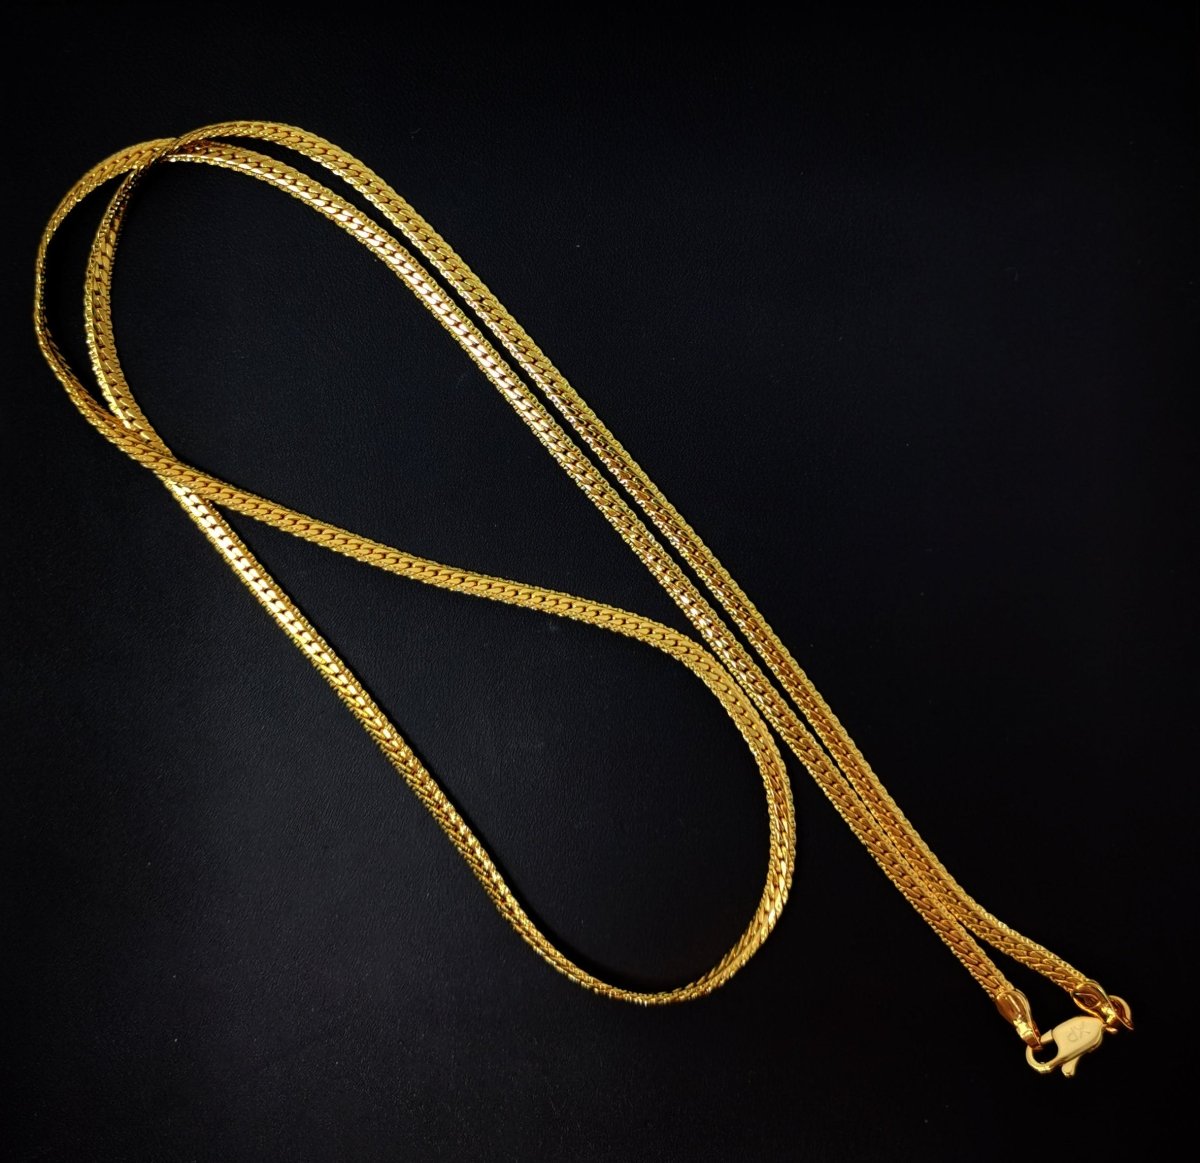 BLOWOUT 24K Gold Filled Herringbone Necklace, 2.3mm in Width, 23.5 Inches w/ Lobster Clasps | CN-418 Clearance Pricing - DLUXCA